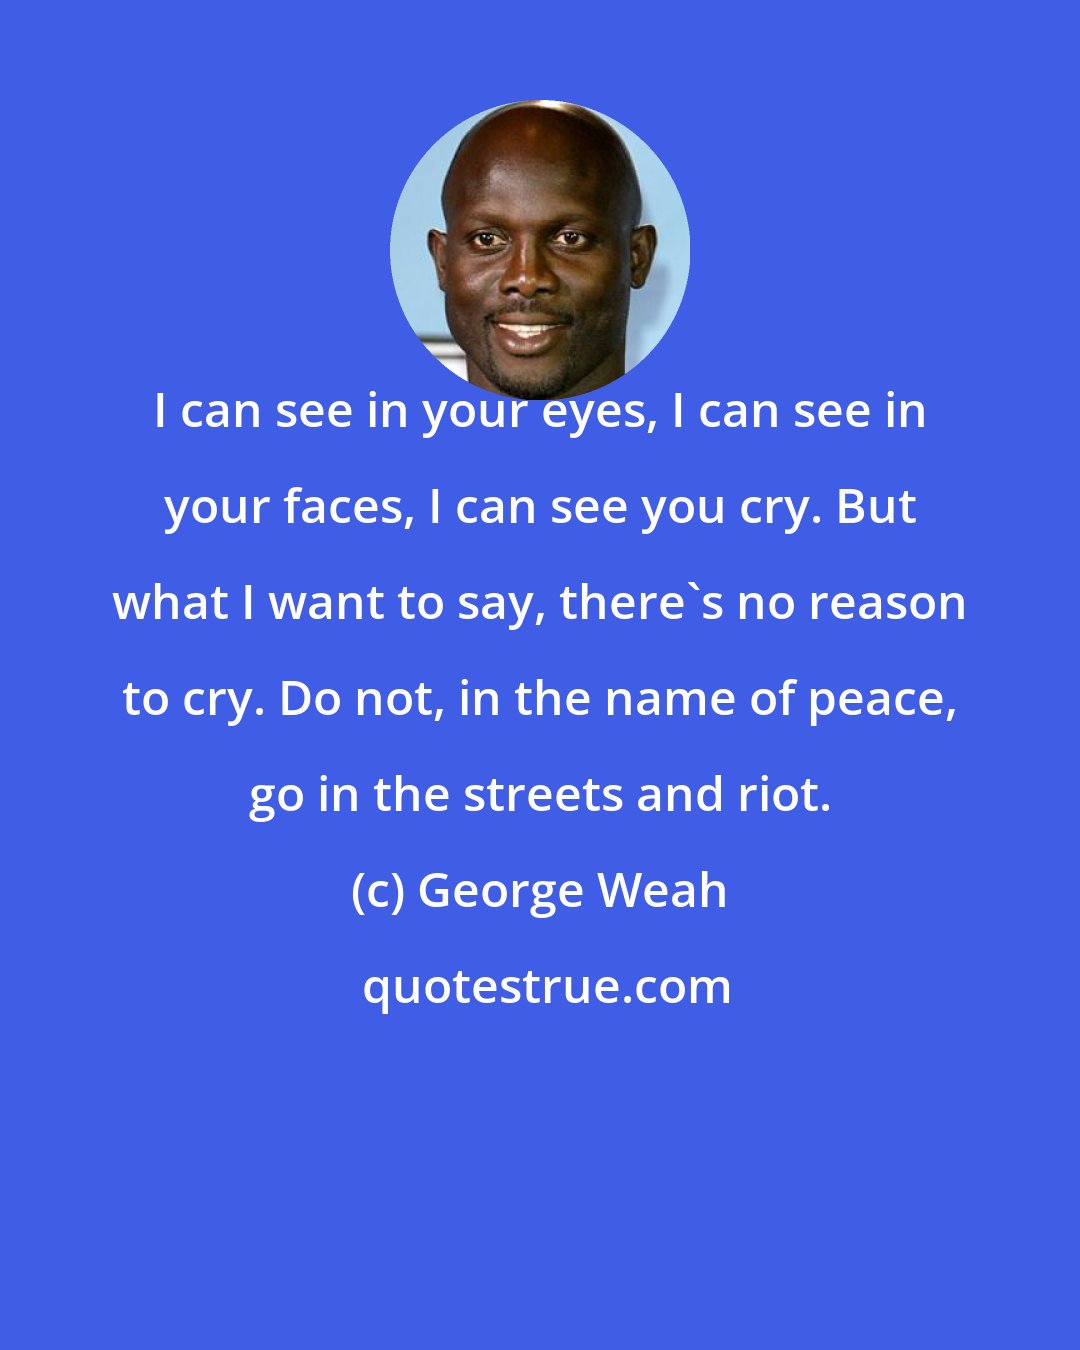 George Weah: I can see in your eyes, I can see in your faces, I can see you cry. But what I want to say, there's no reason to cry. Do not, in the name of peace, go in the streets and riot.